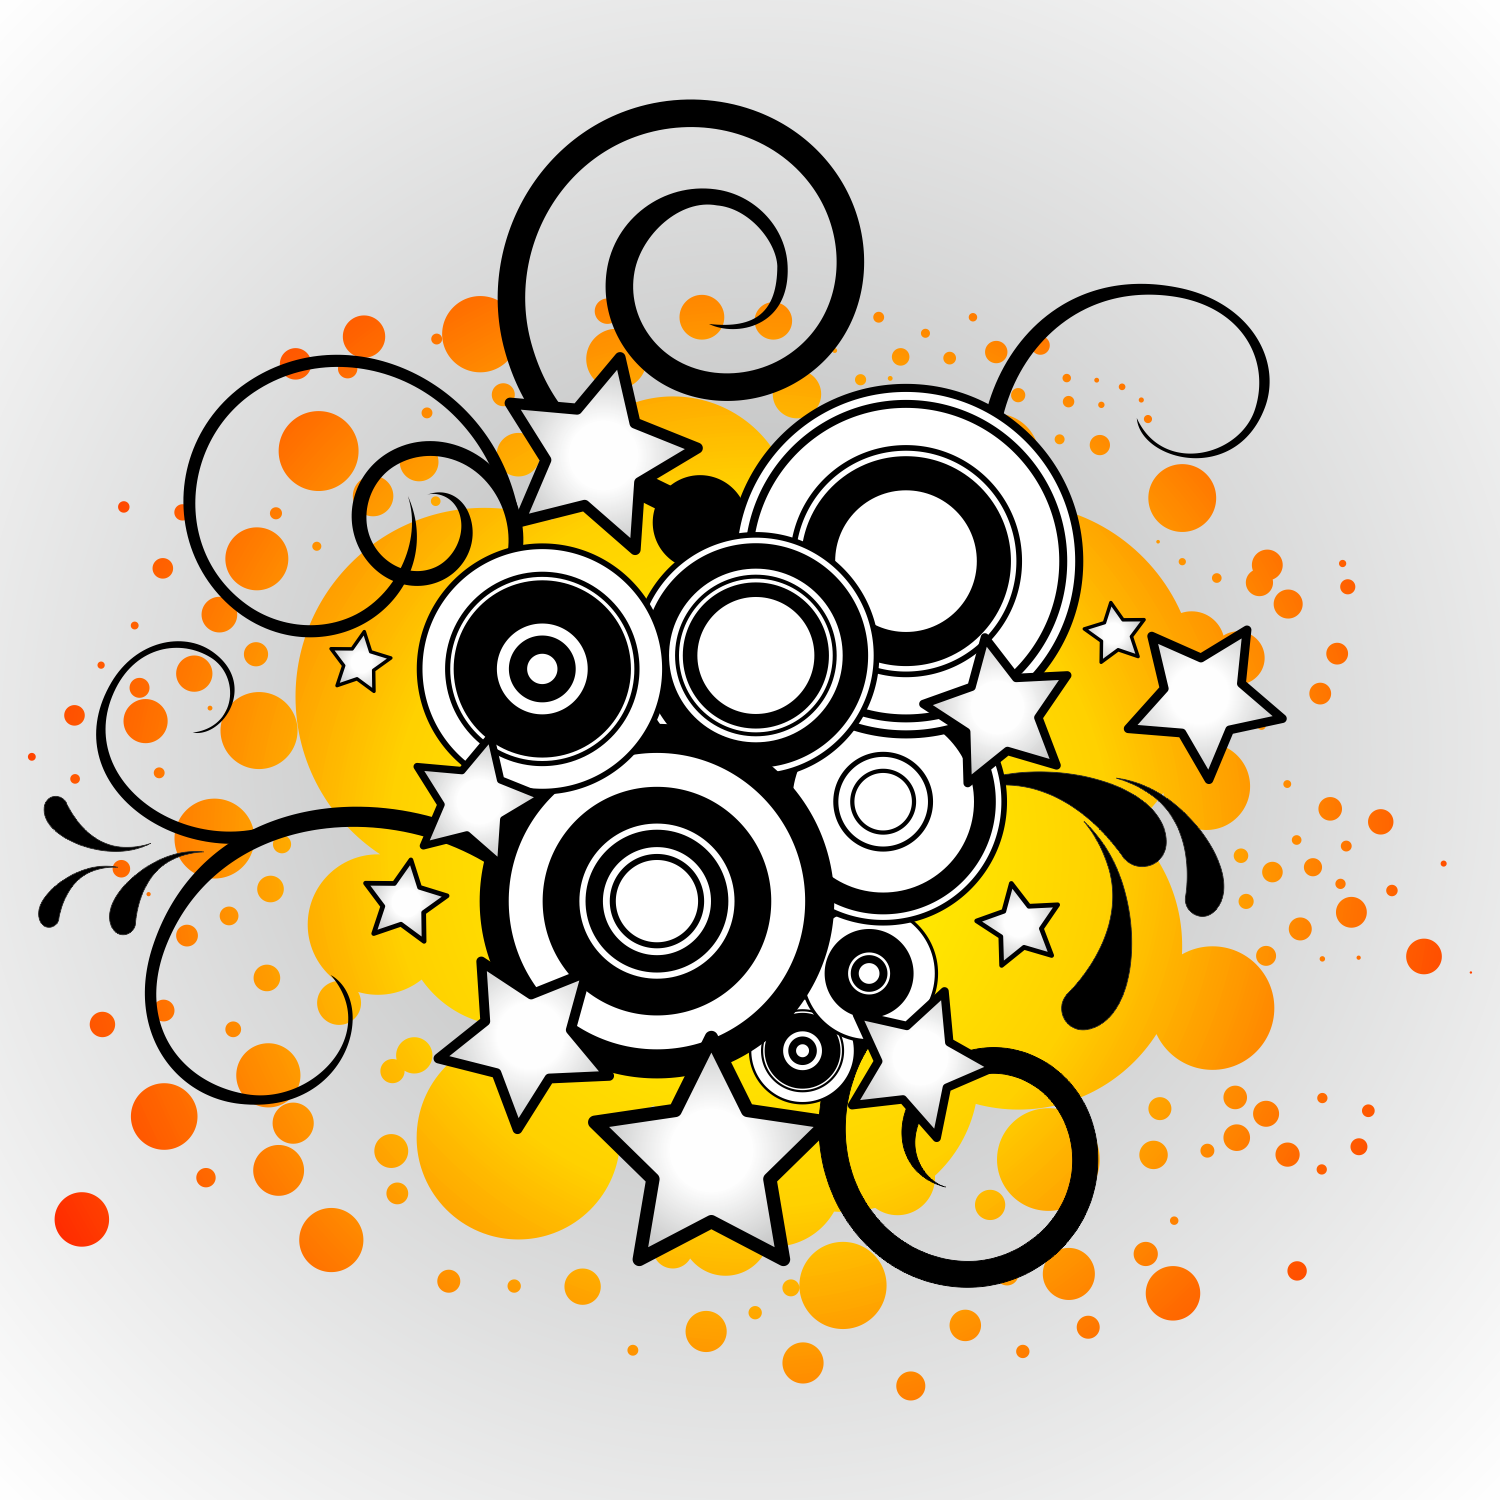 free vector clipart music - photo #38